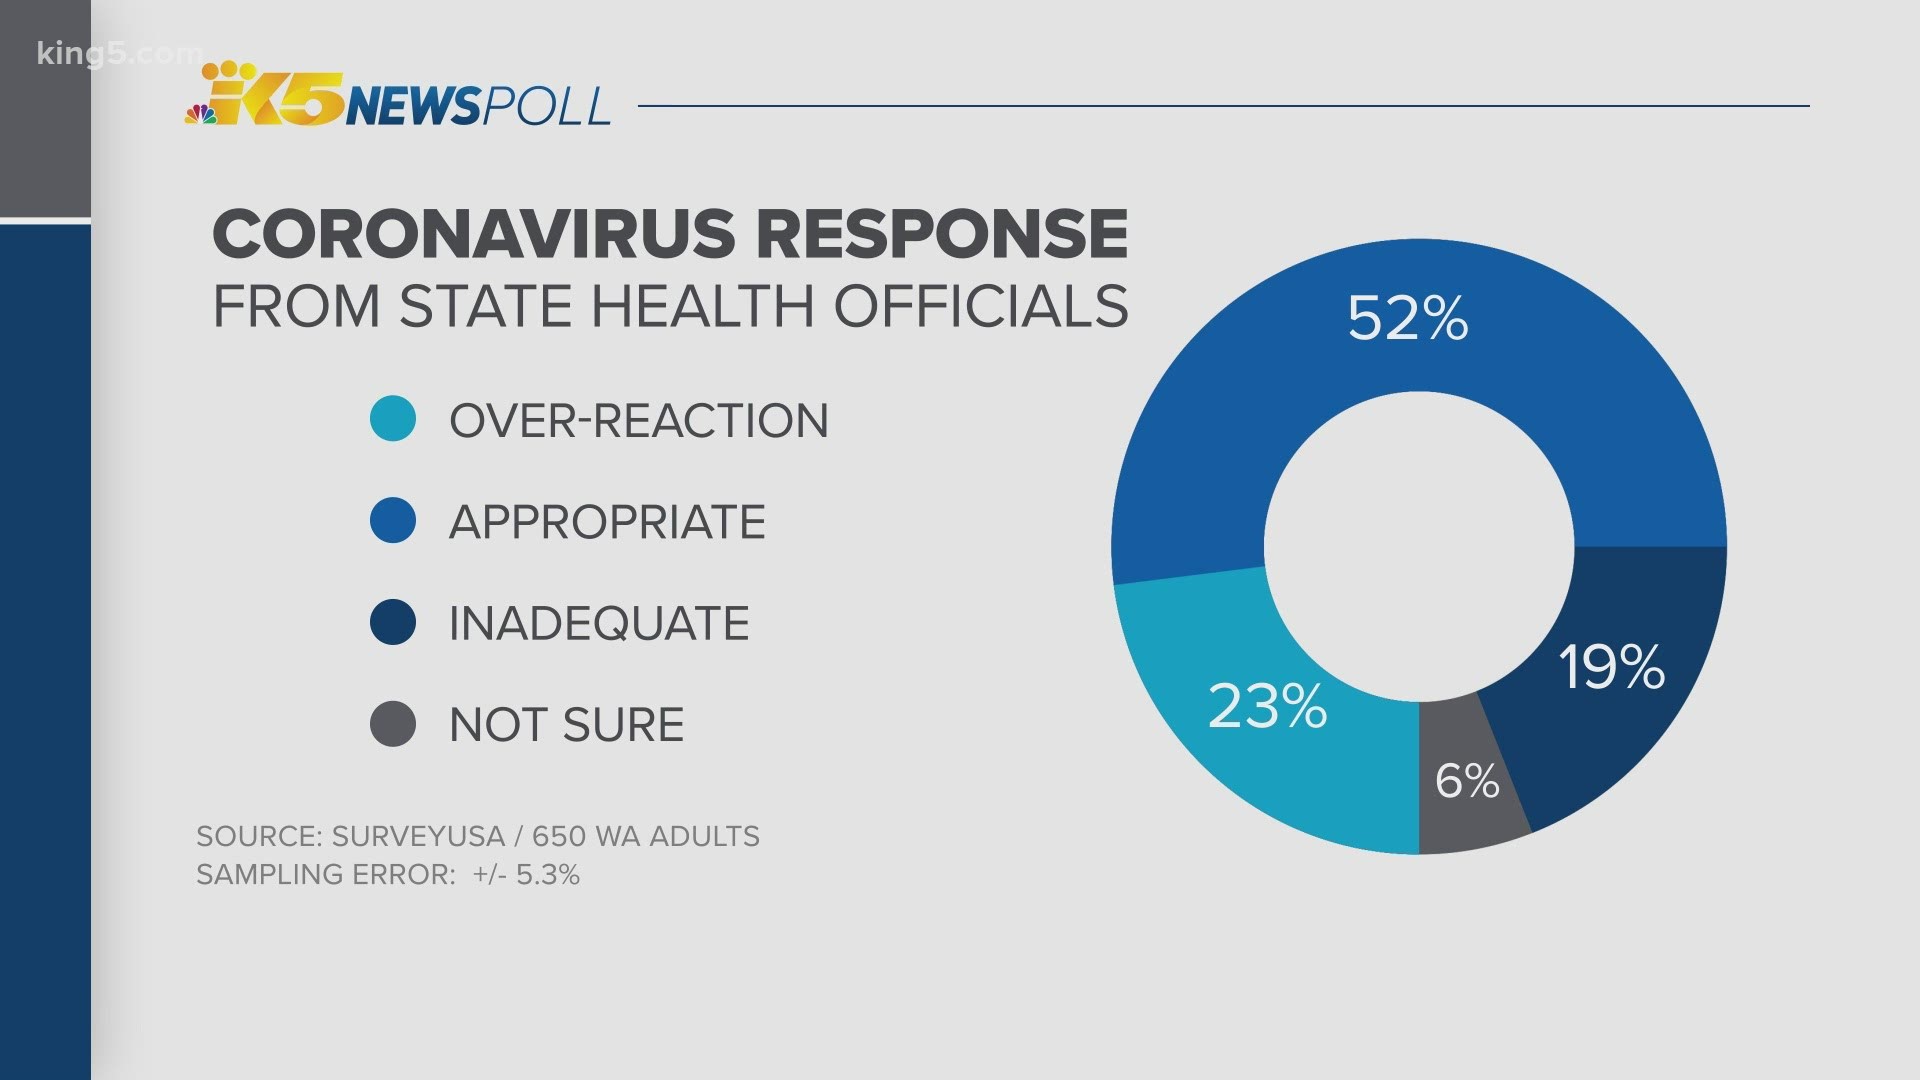 After a slow COVID-19 vaccine rollout, half of surveyed Washingtonians say the state could be doing more to inoculate people.